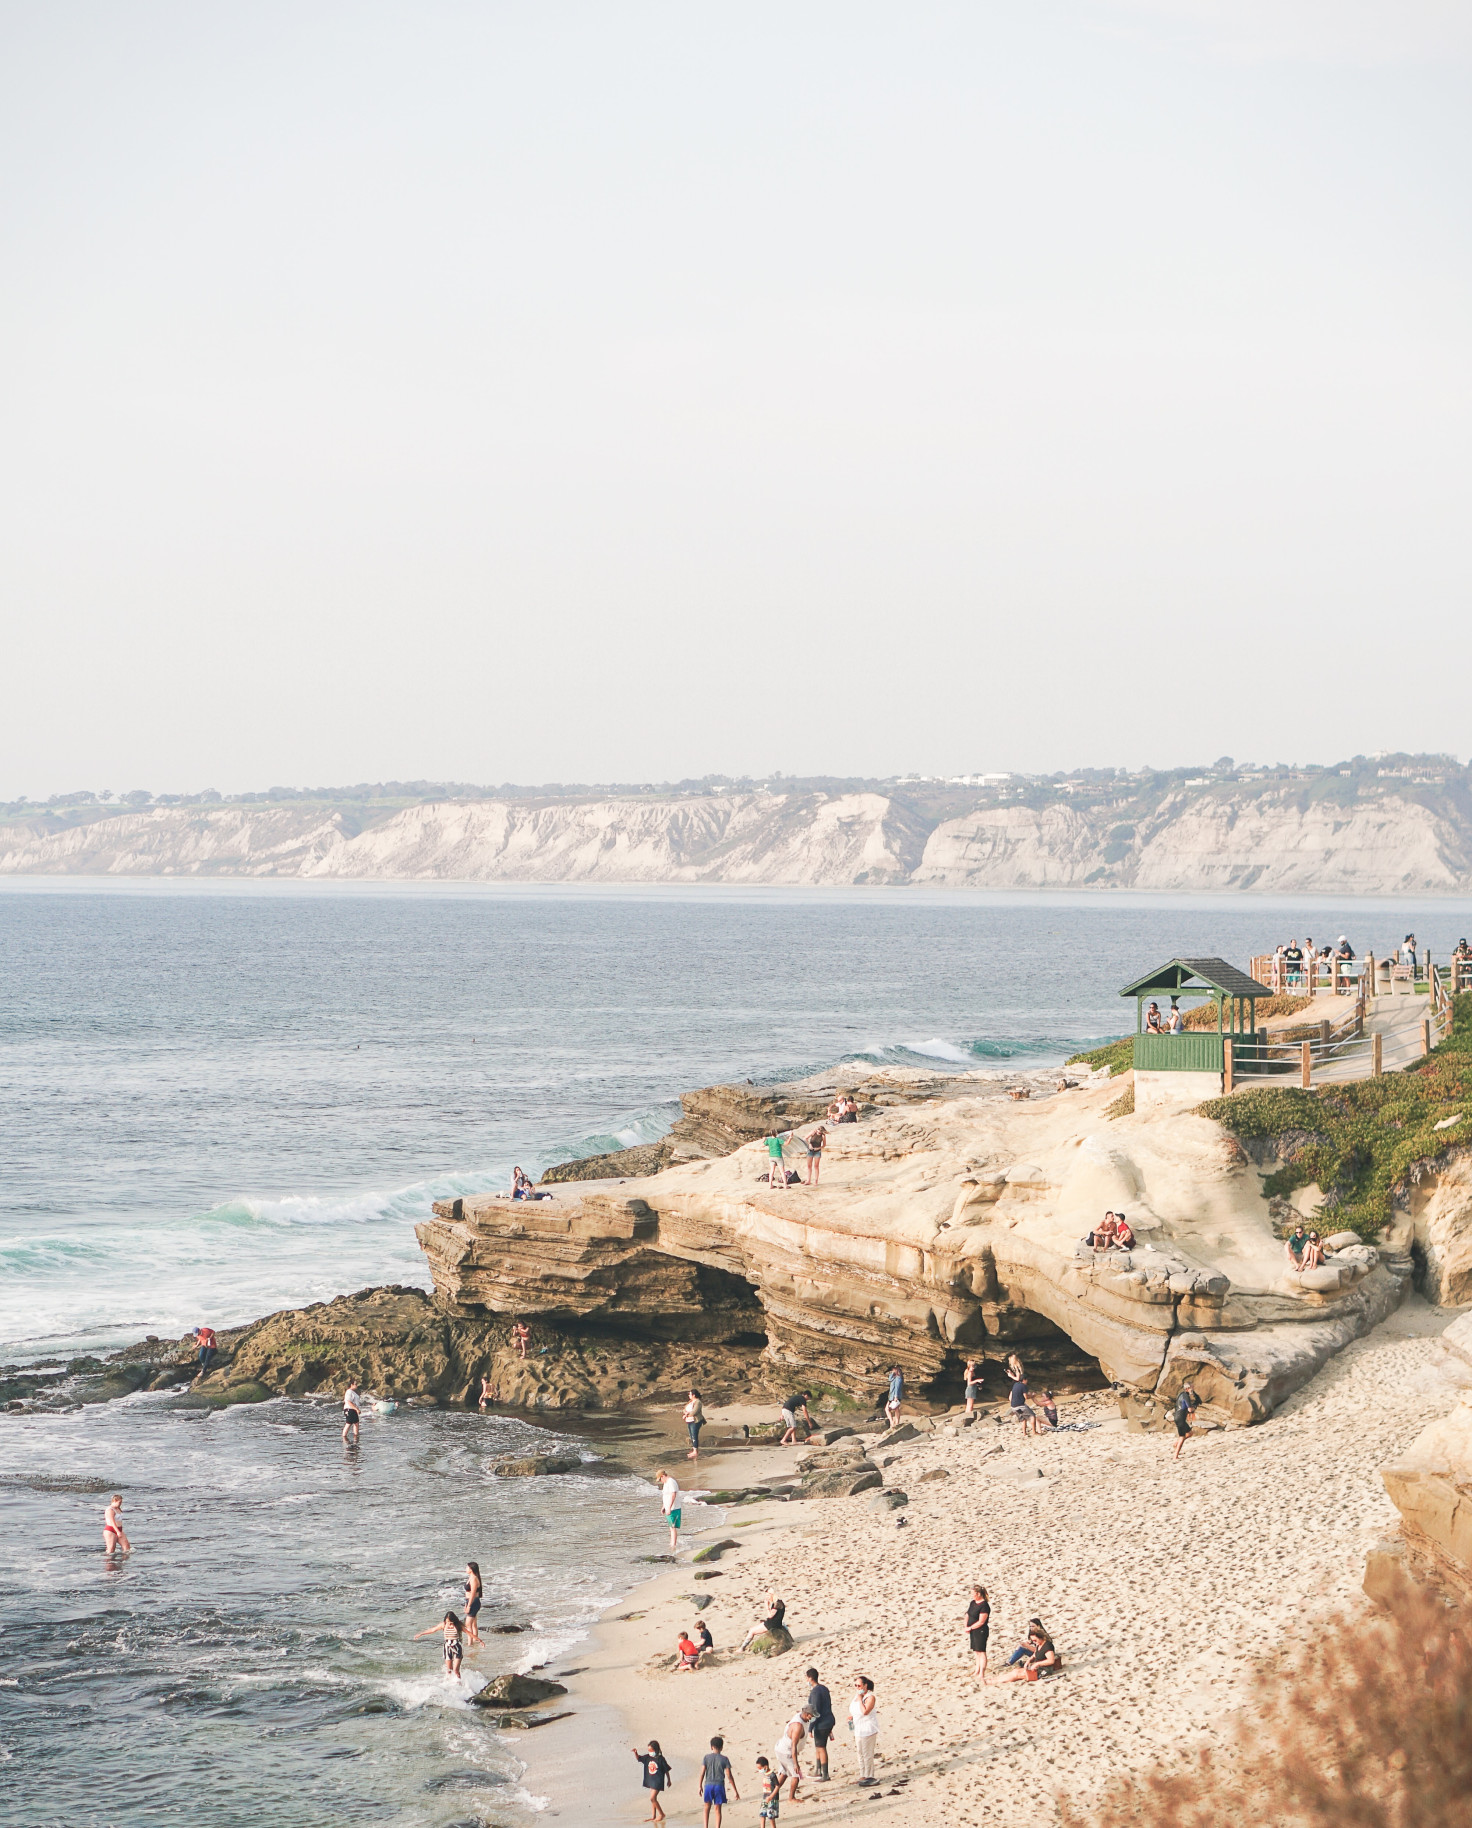 People stand on the sand and in the water on La Jolla Cove in San Diego